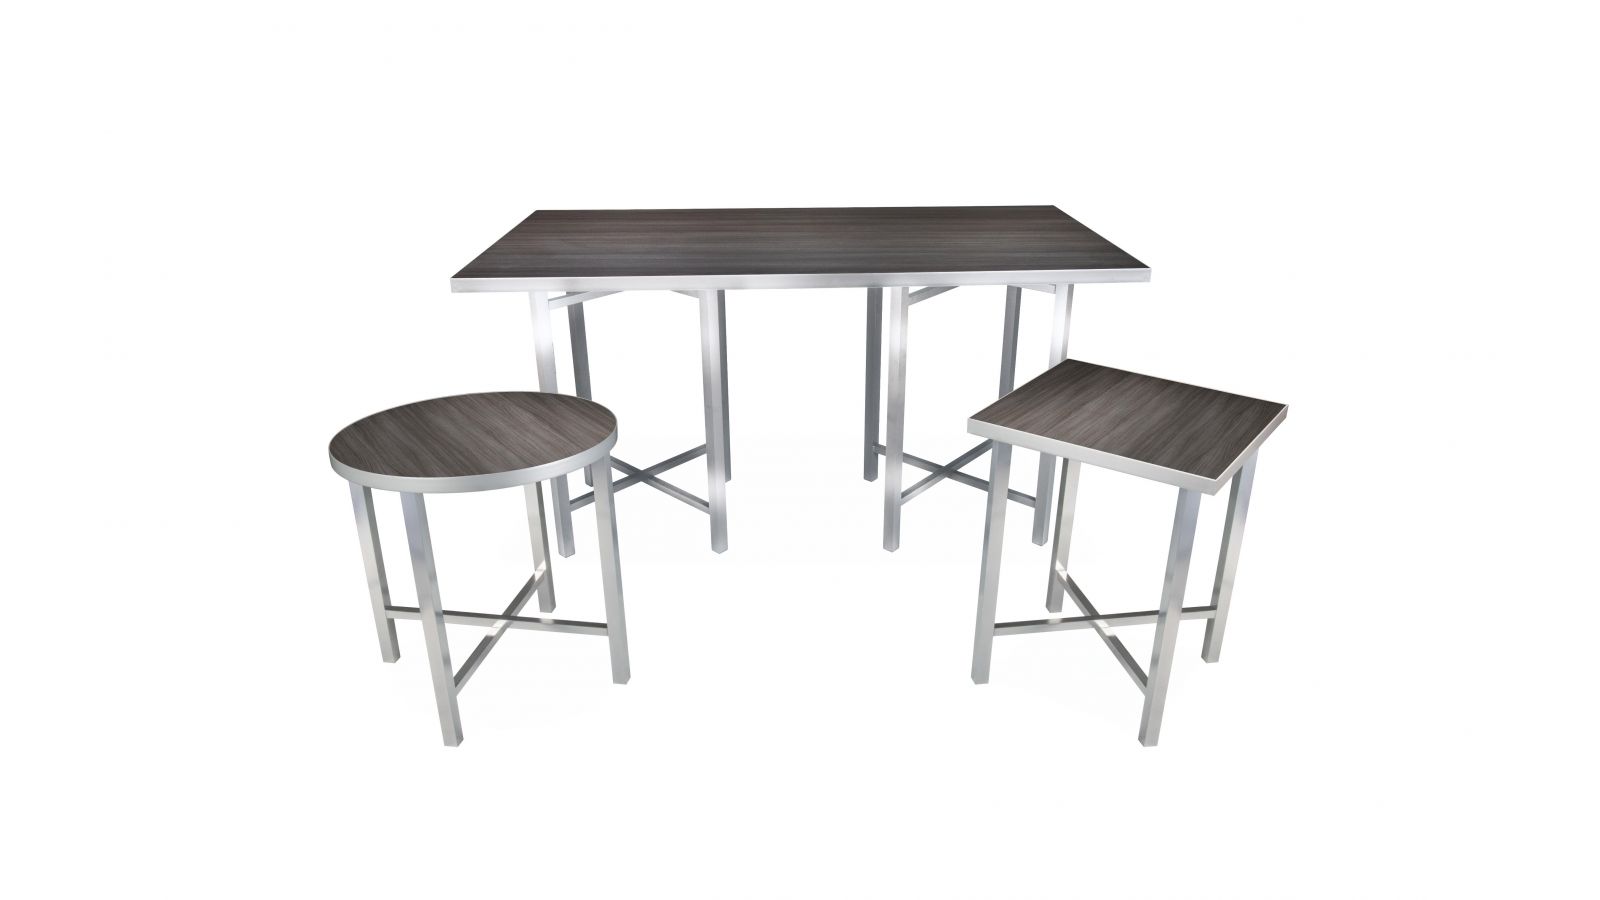 XCube Tables™ featuring ENGAGE Locking System™